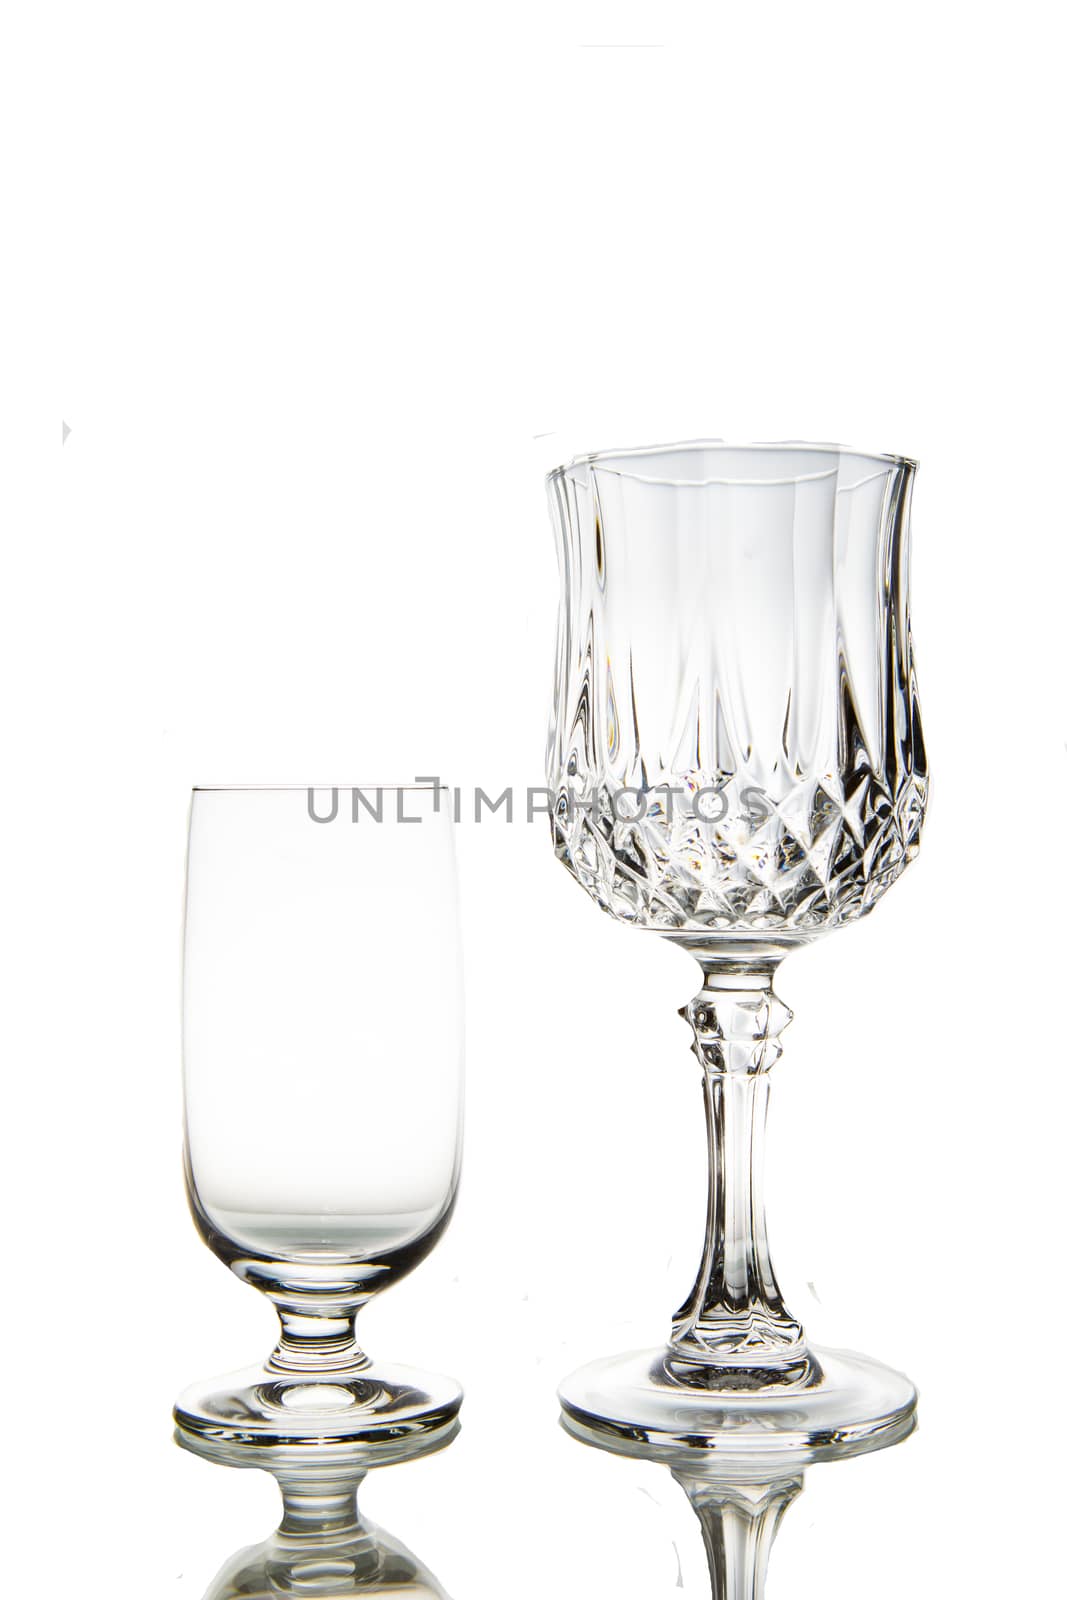 Two Empty wine glass. isolated on a white background  by thanomphong